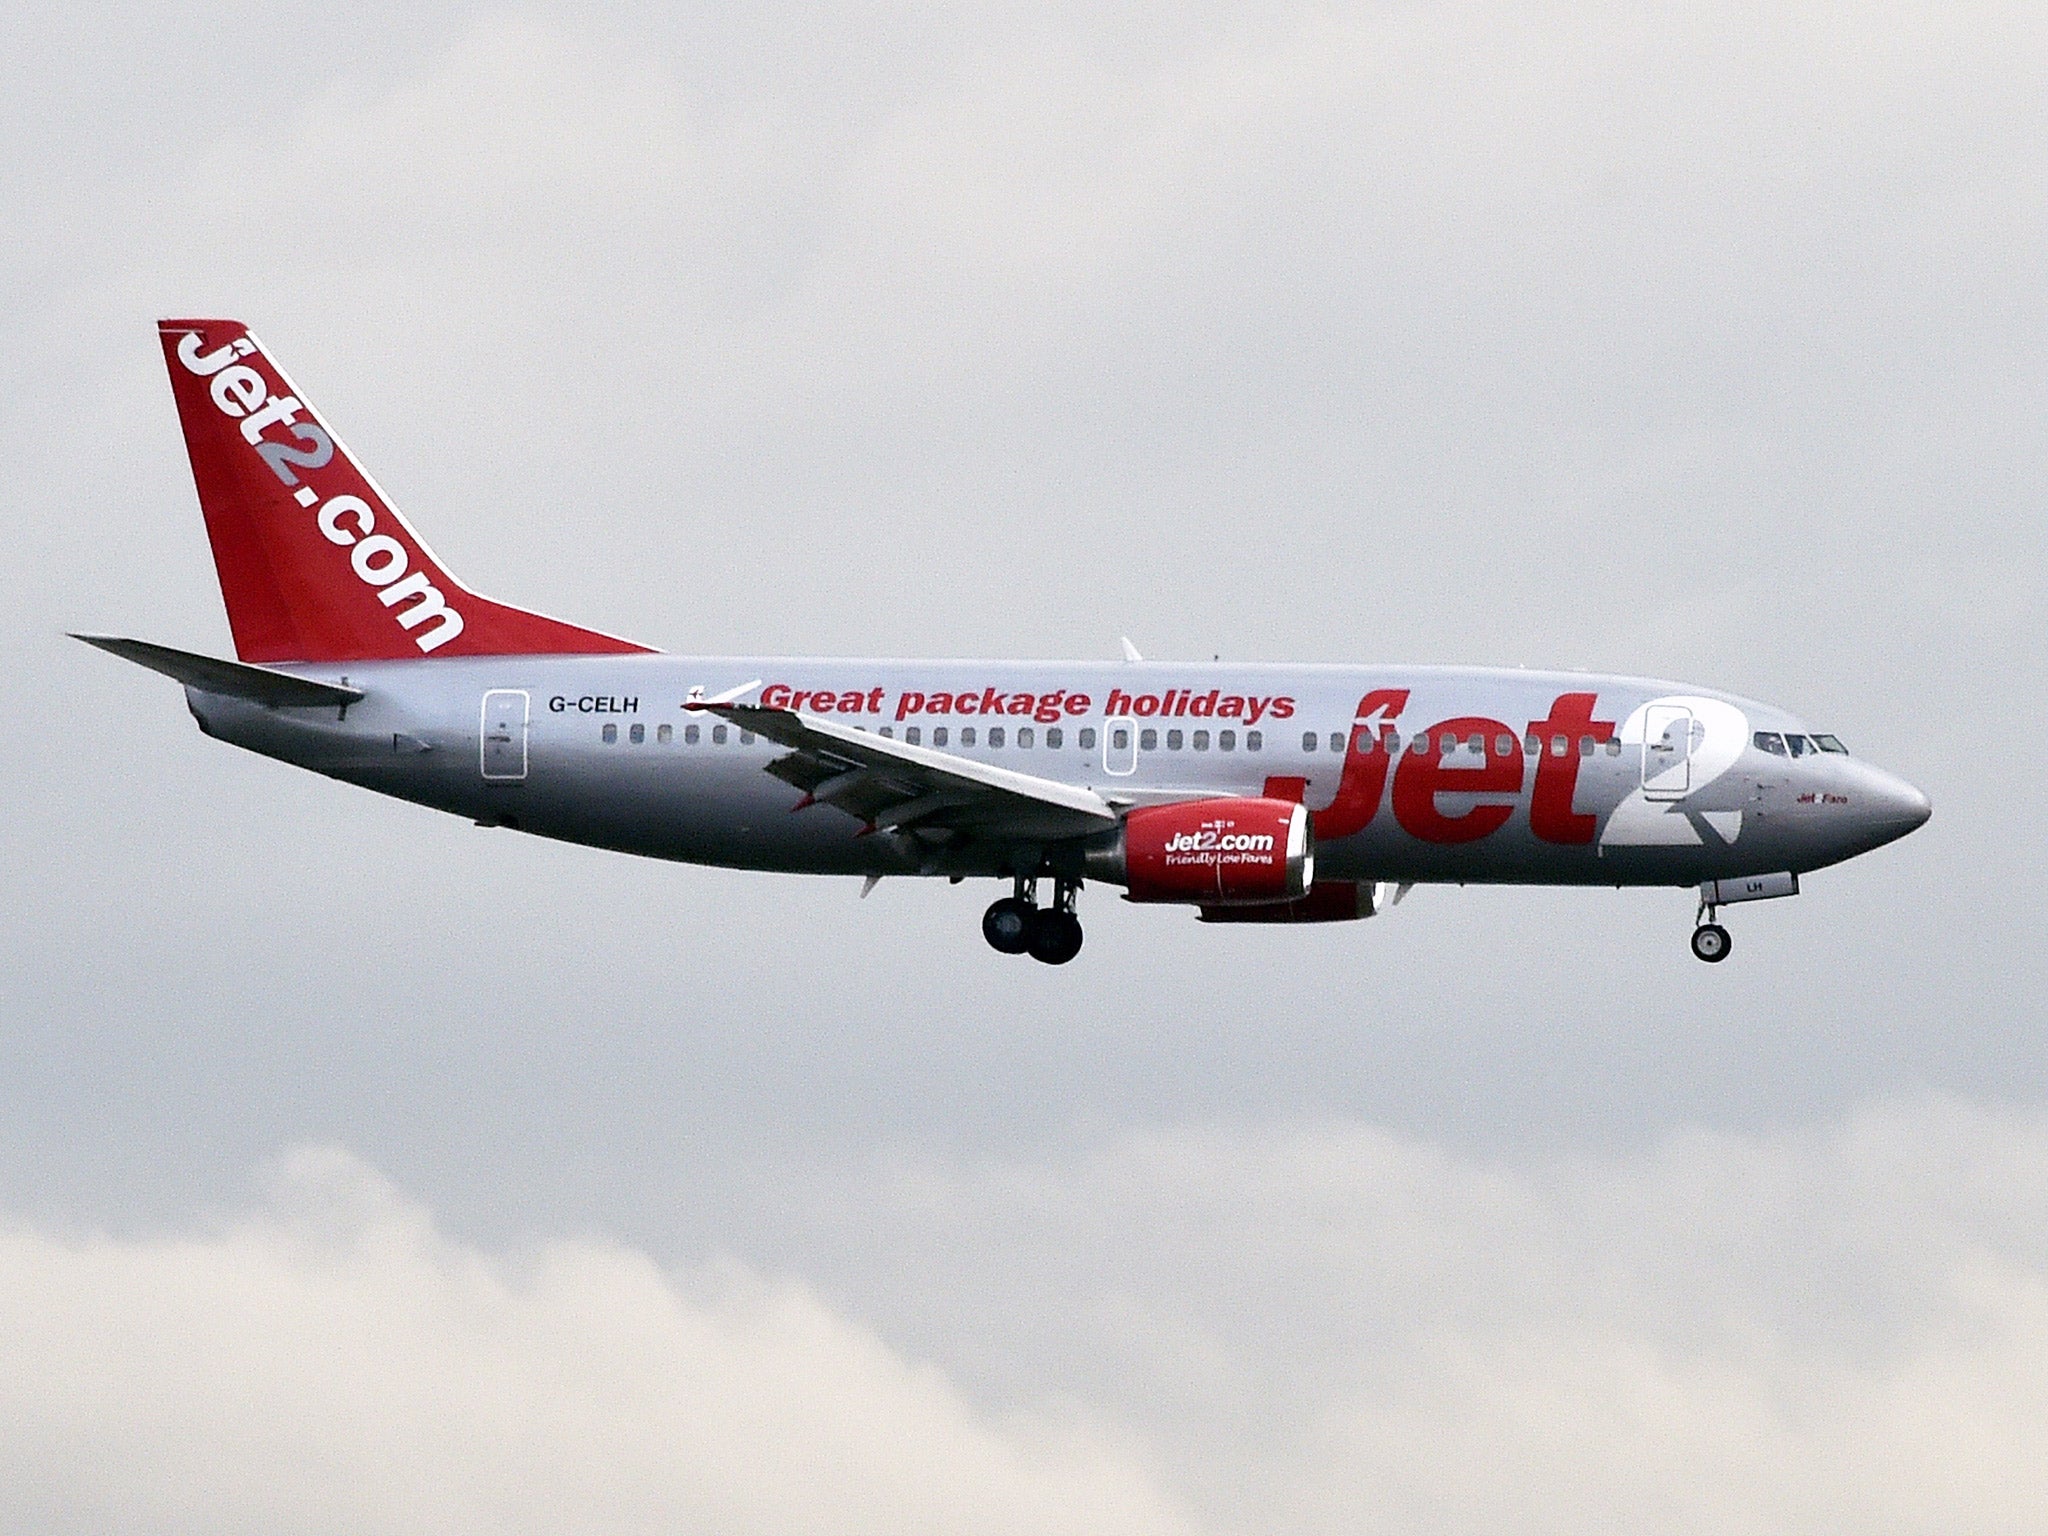 Jet2 is Blackpool airport's largest airline